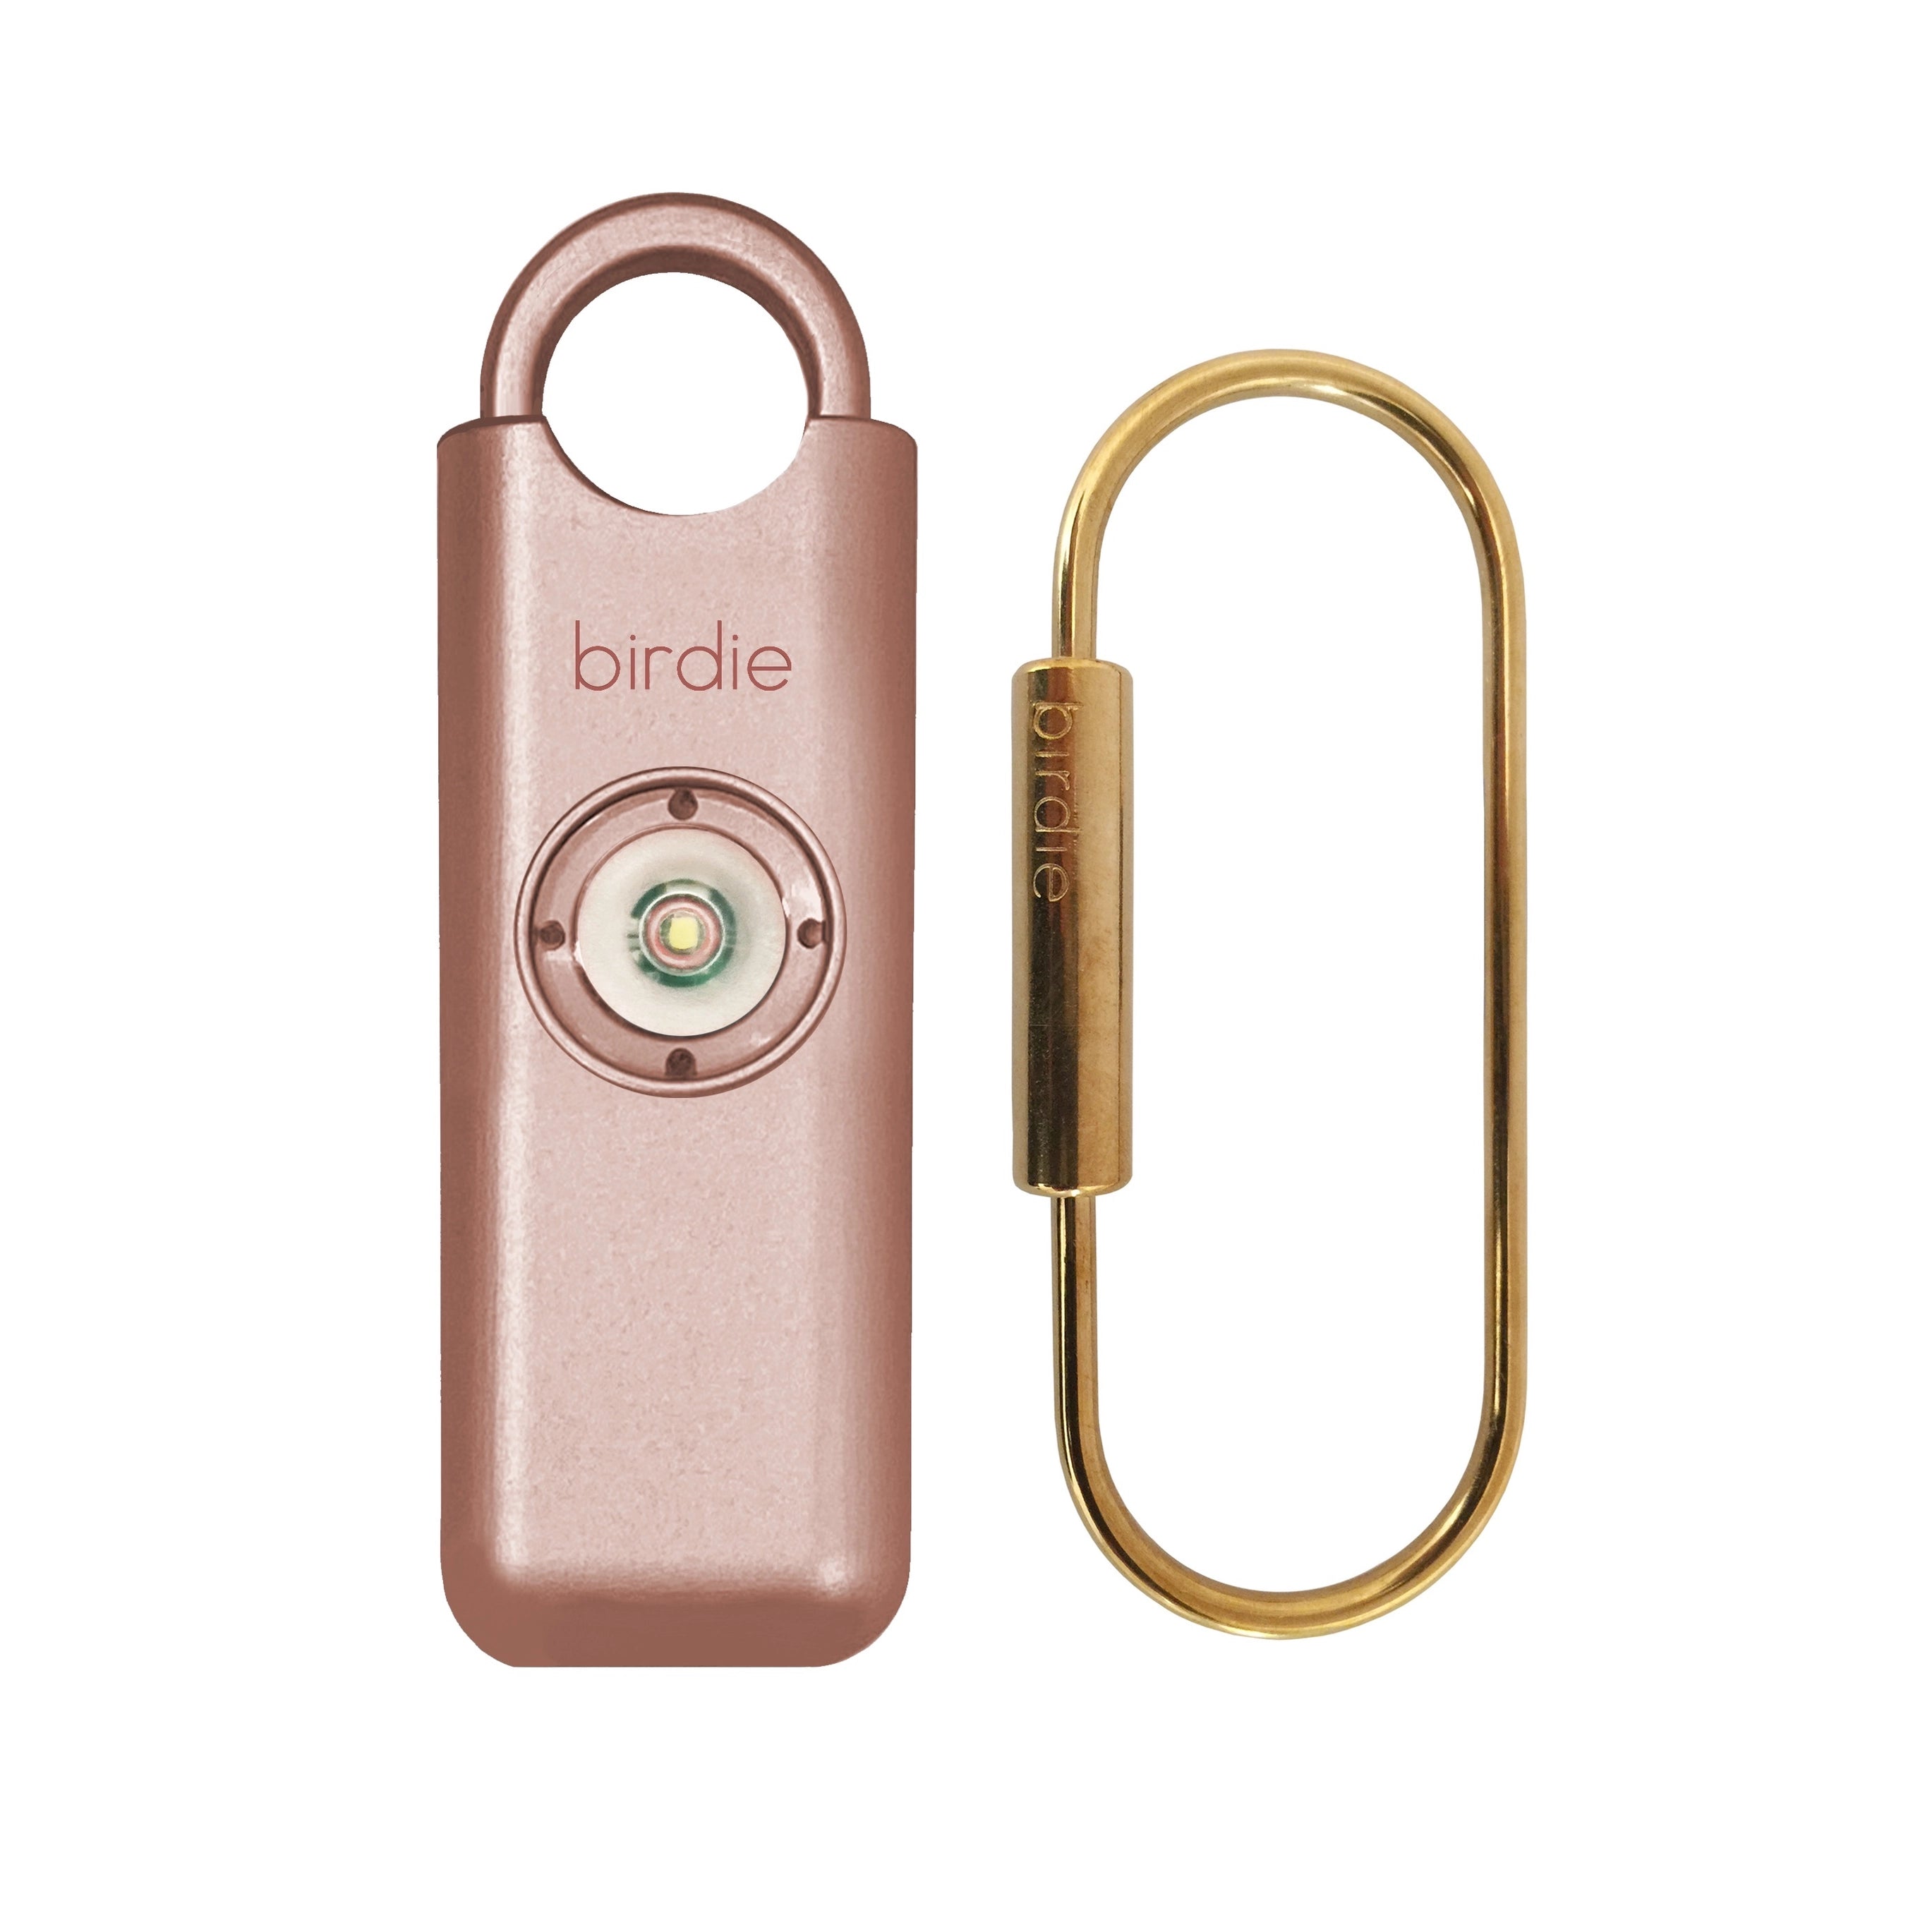 She's Birdie Personal Safety Alarm - (ten colors)